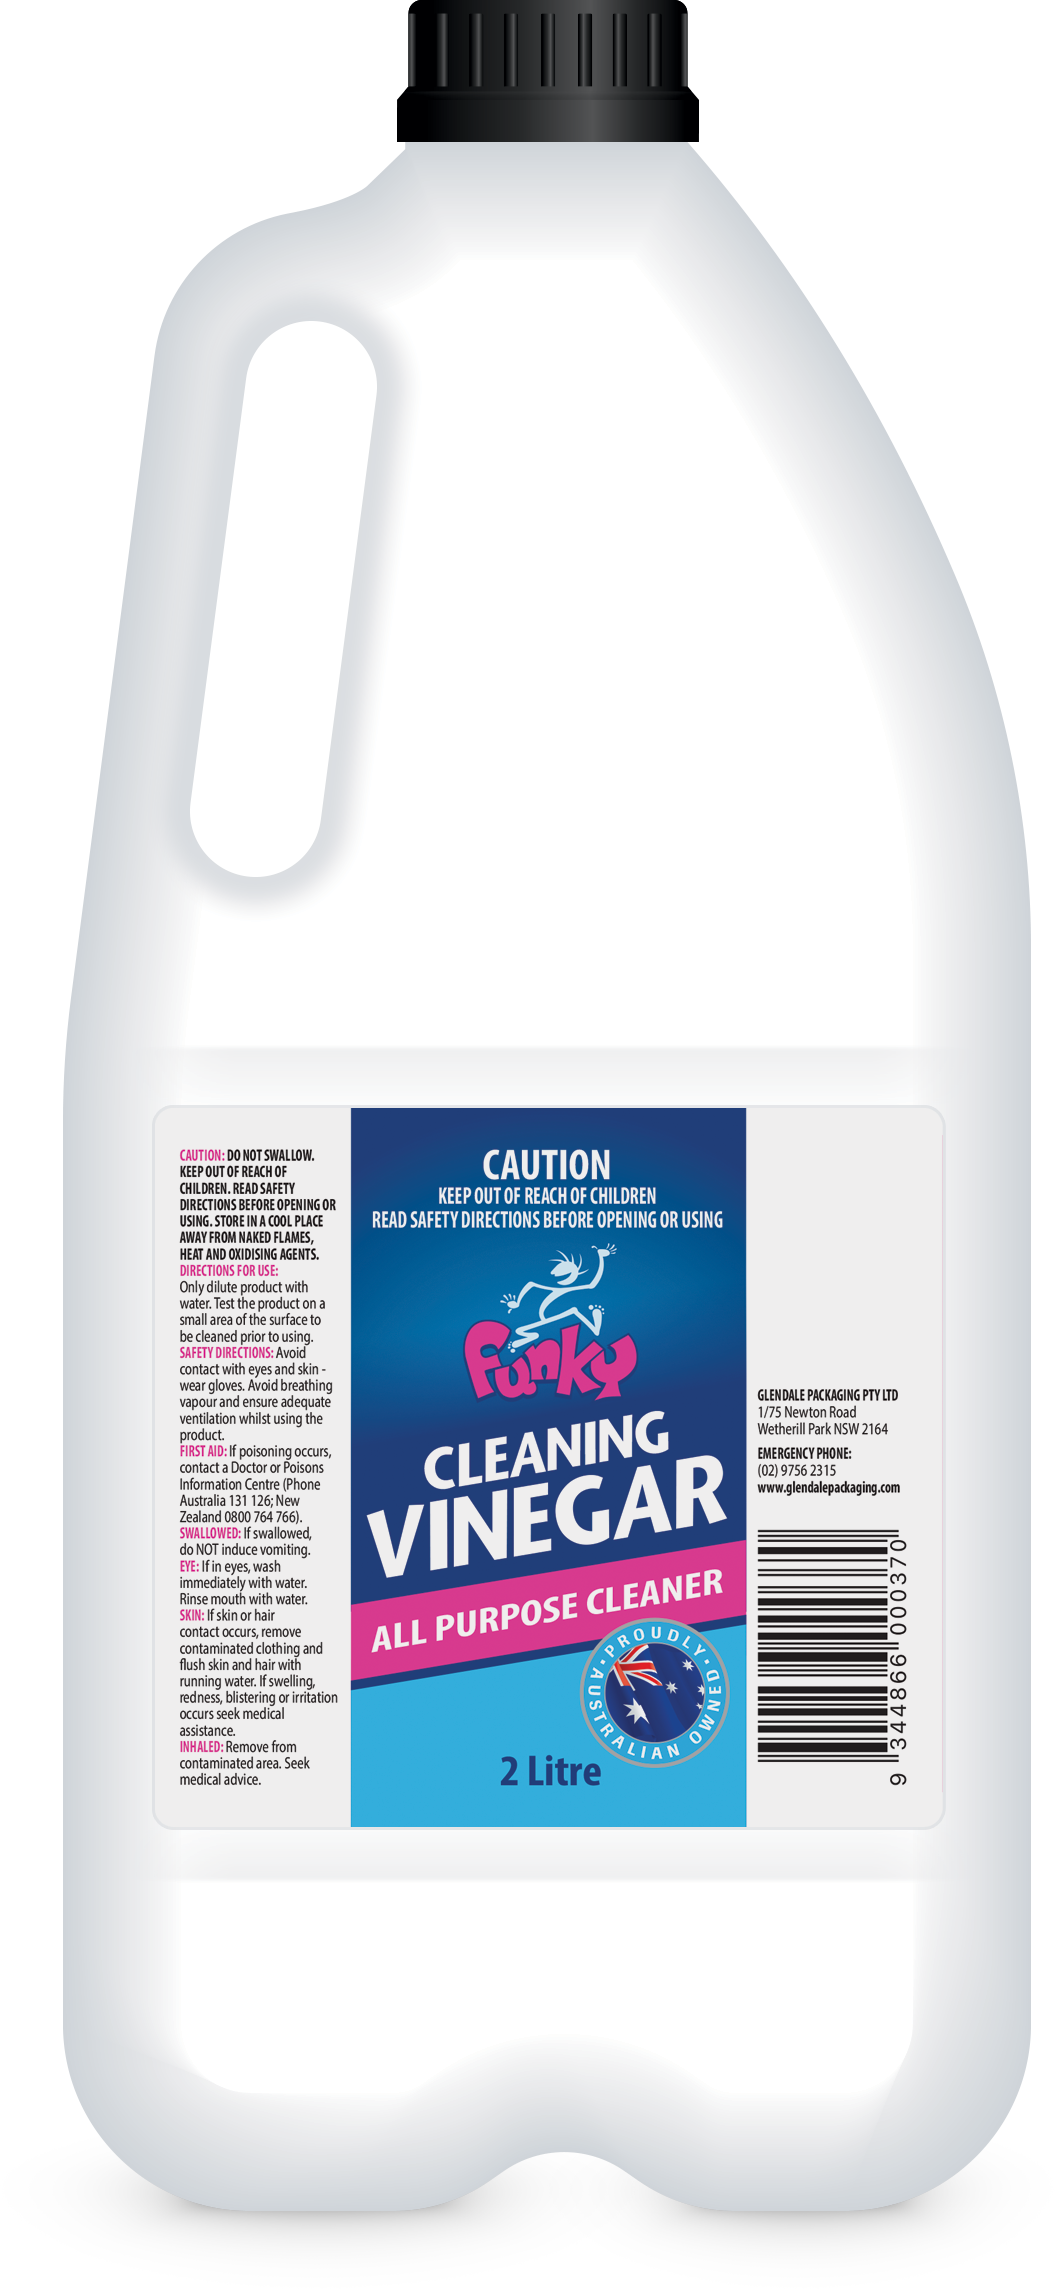 Cleaning Vinegar - All Purpose Cleaner